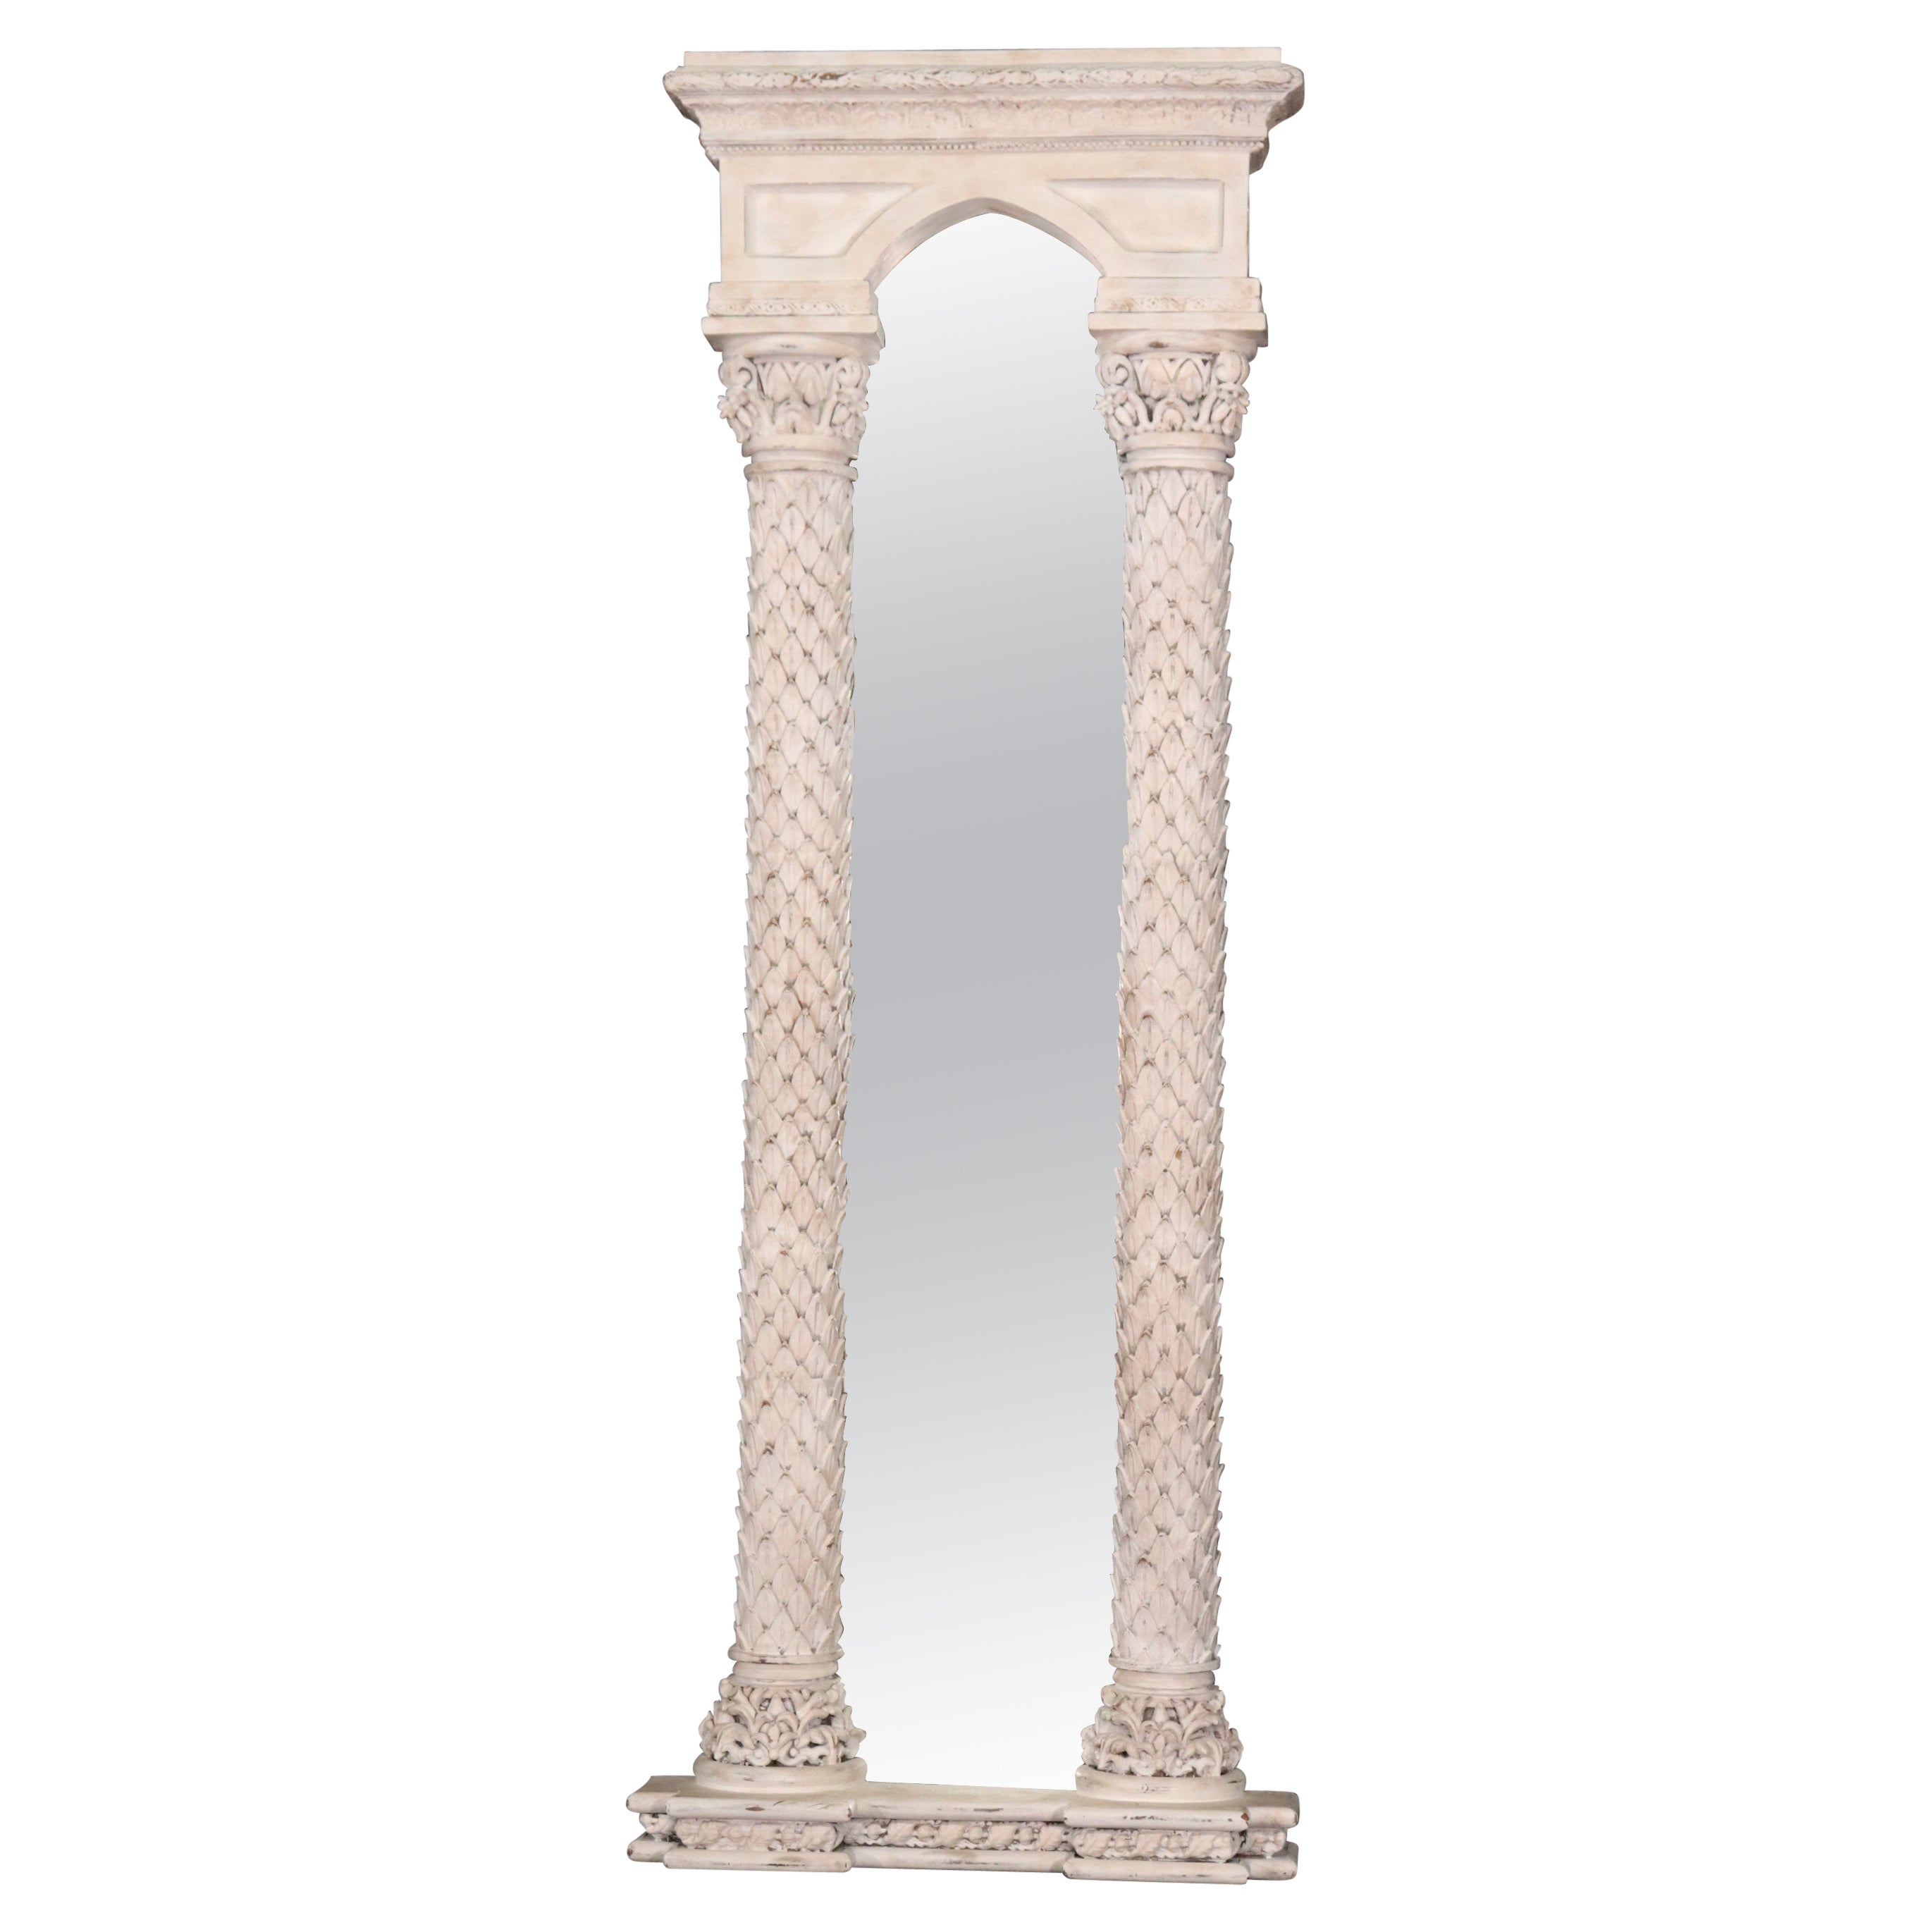 White Painted Tall and Narrow Italian Neoclassical Carved Wood Mirror